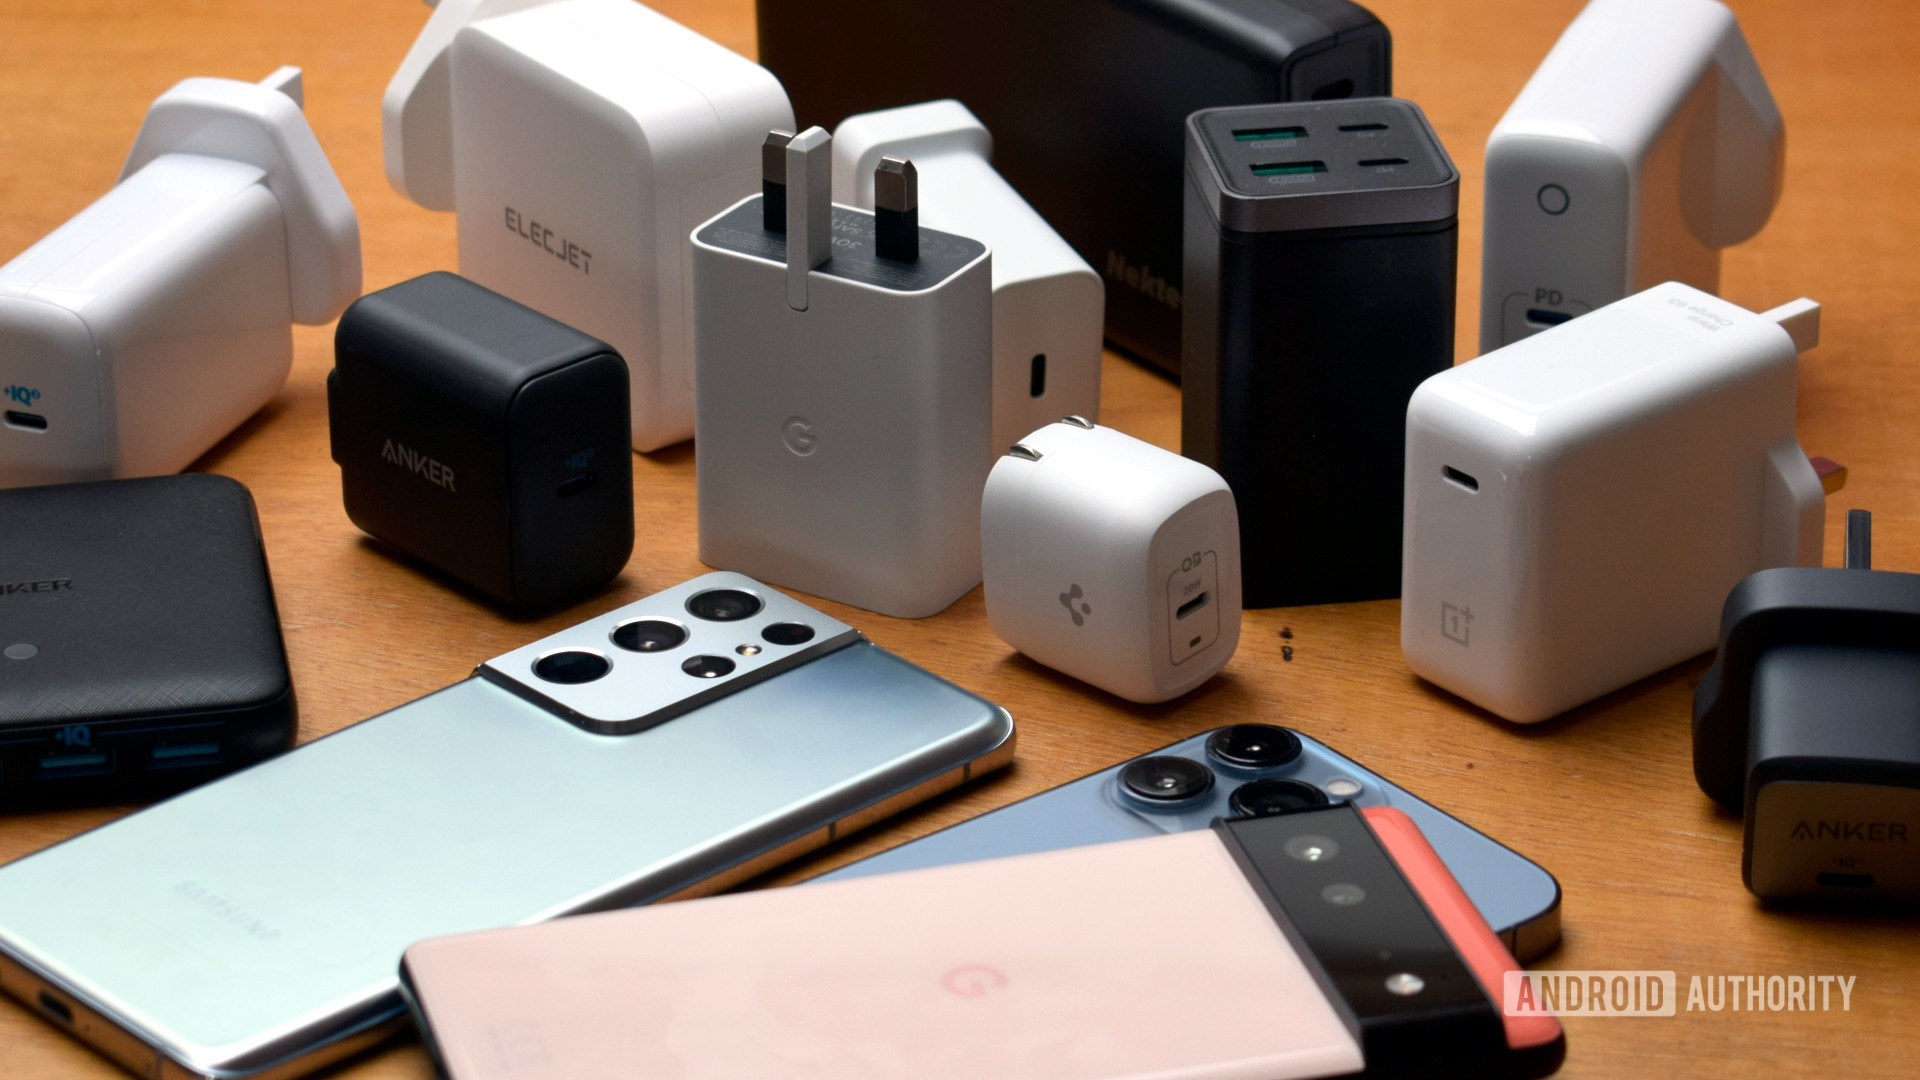 Galaxy Iphone And Pixel Smartphones With A Selection Of Chargers